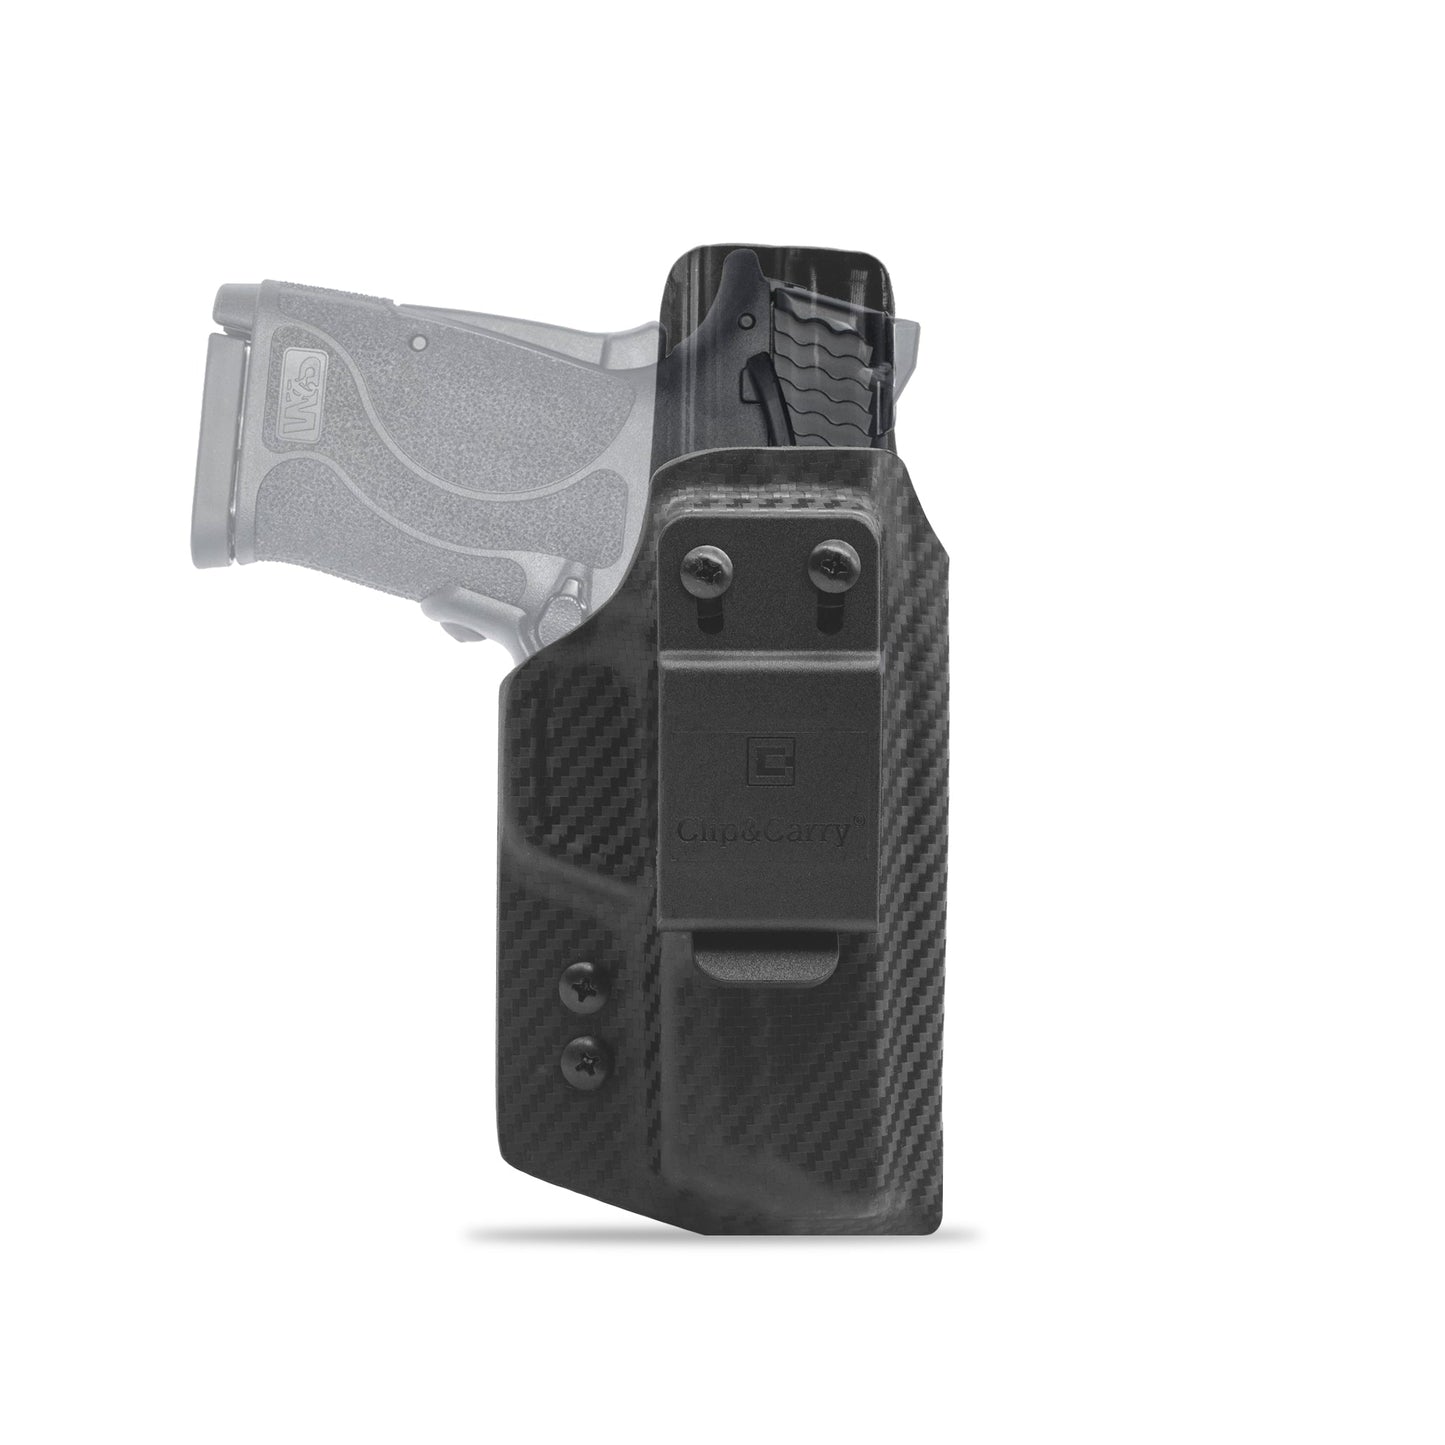 IWB Holster for the Smith & Wesson Shield EZ 9mm Clip & Carry